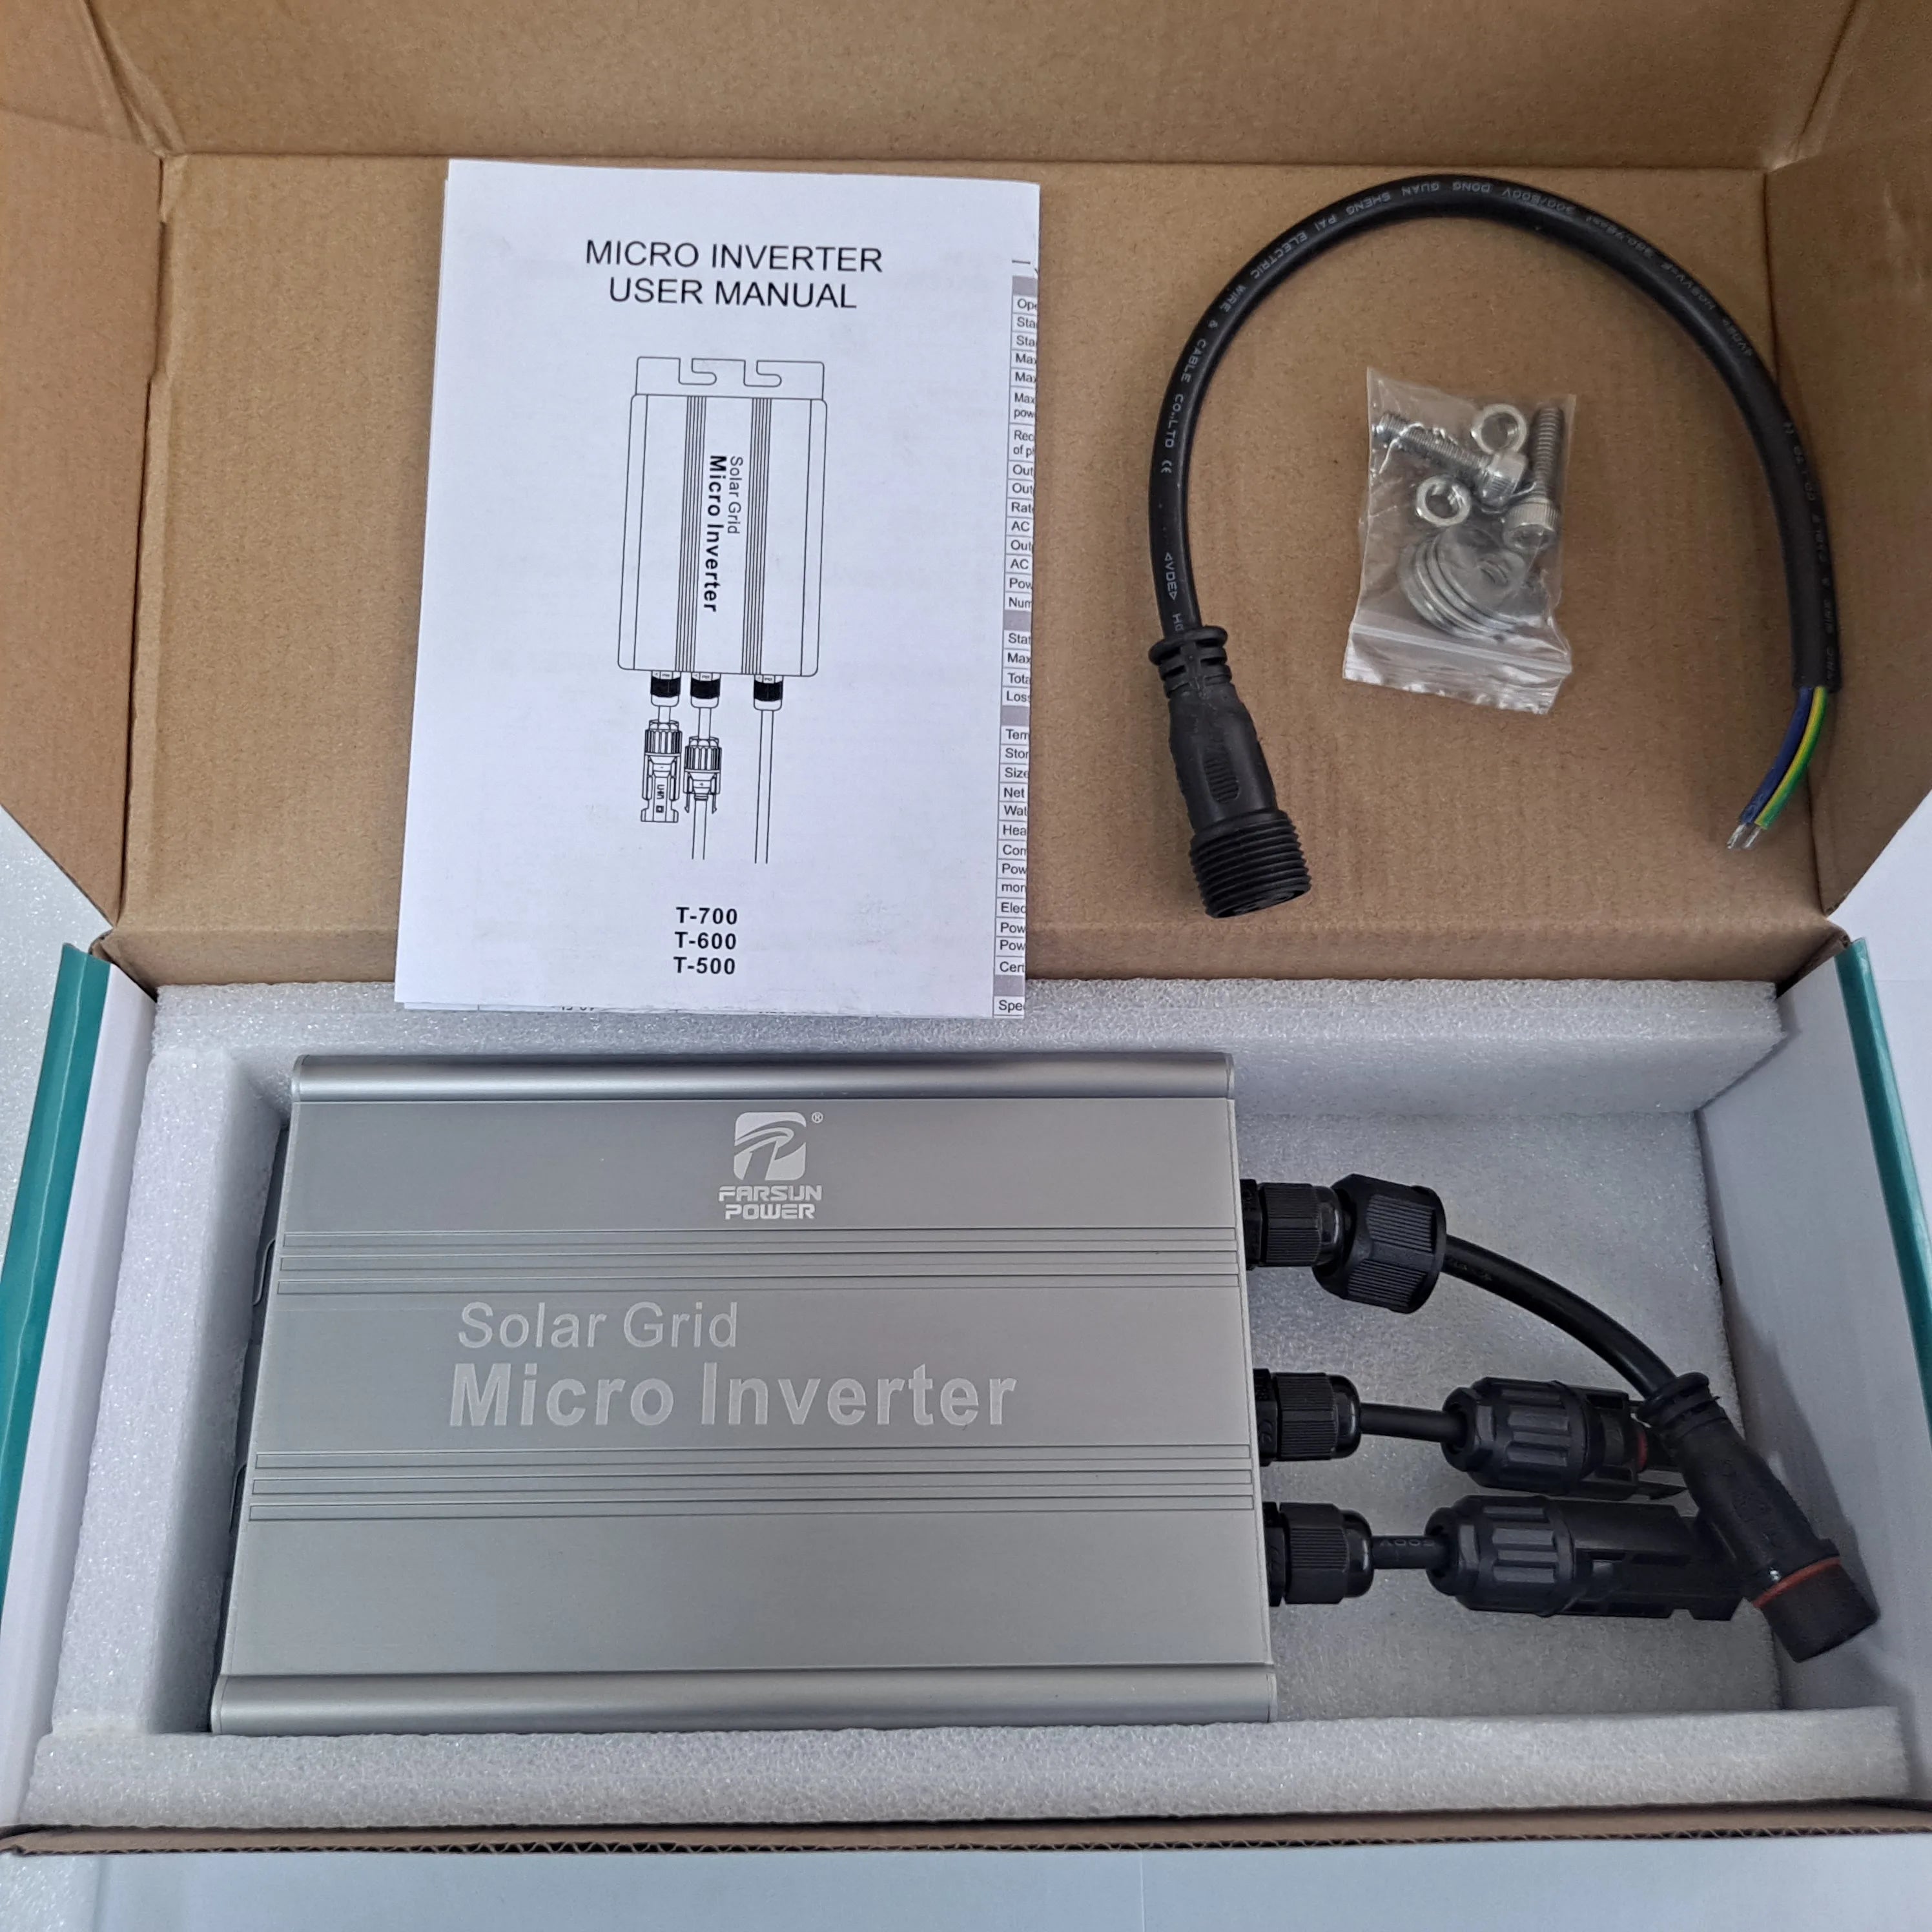 MPPT Solar Grid Tie Micro Inverter, Grid-tie solar inverter for home solar power systems, 500-700W output.